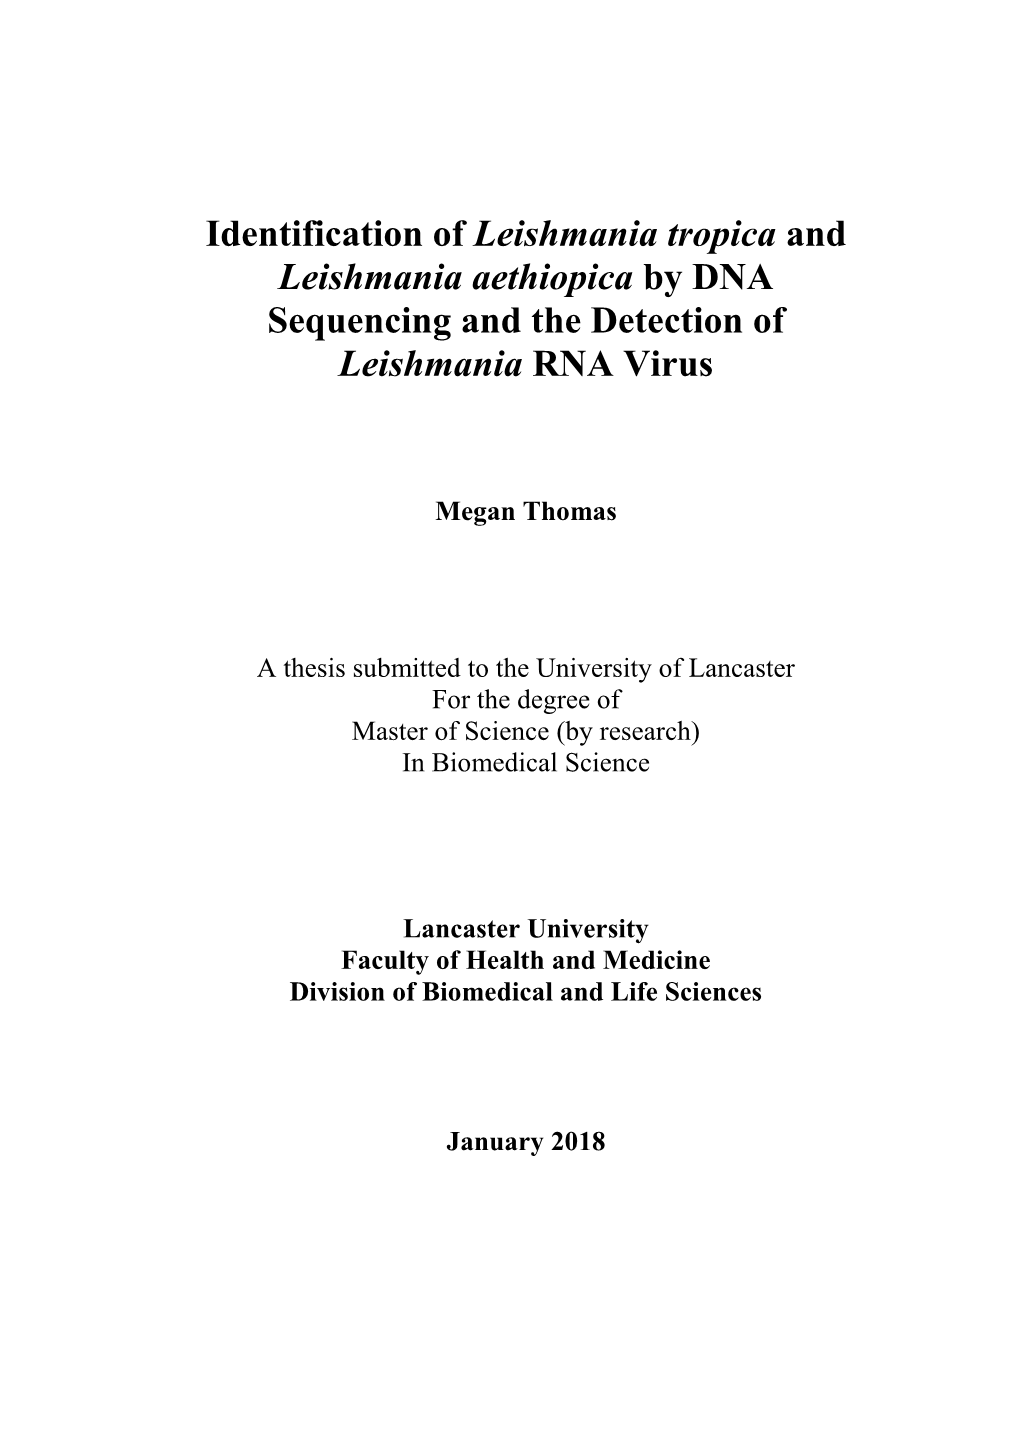 Identification of Leishmania Tropica and Leishmania Aethiopica by DNA Sequencing and the Detection of Leishmania RNA Virus